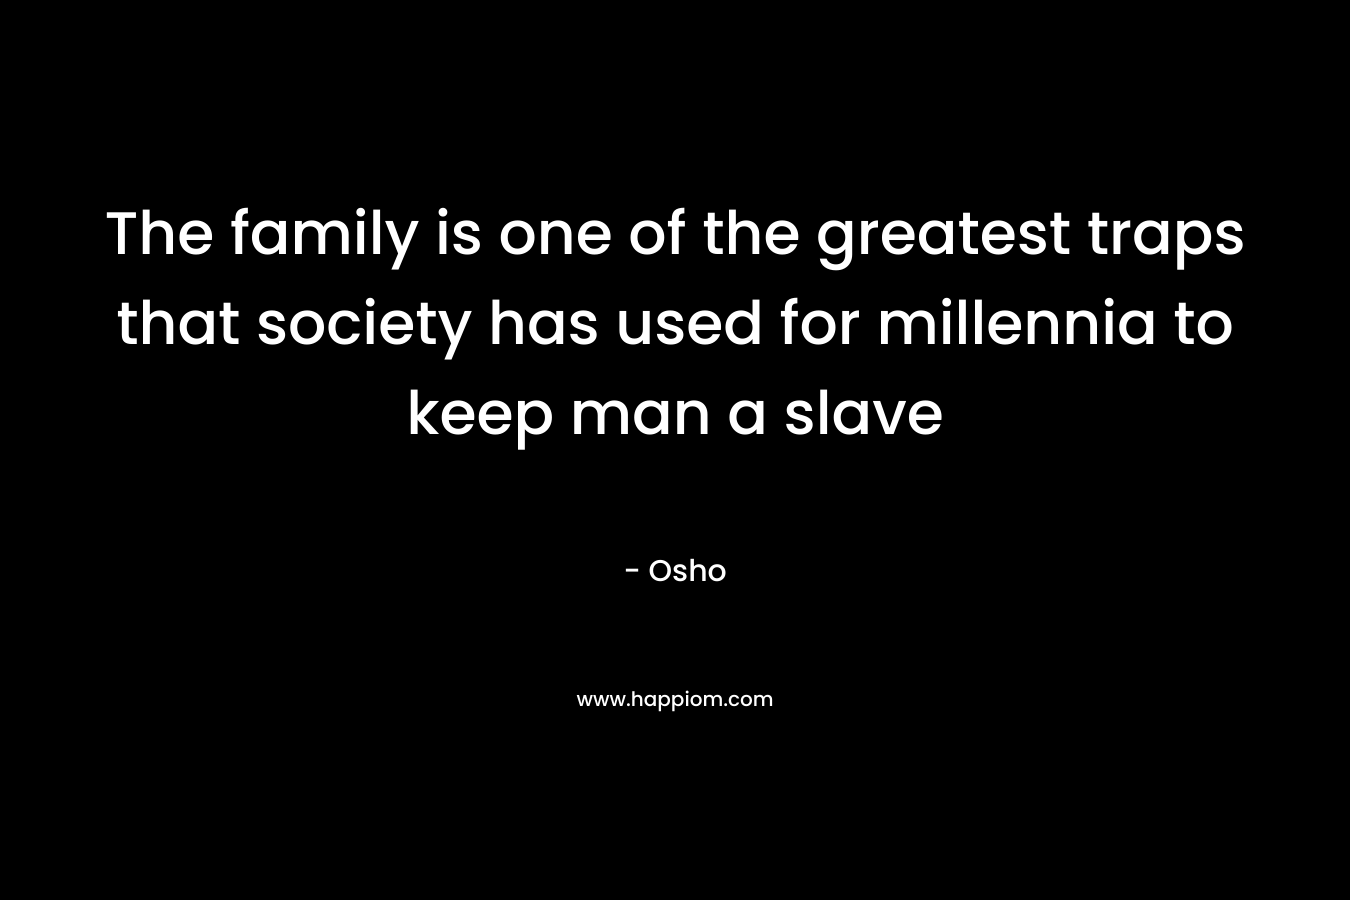 The family is one of the greatest traps that society has used for millennia to keep man a slave – Osho